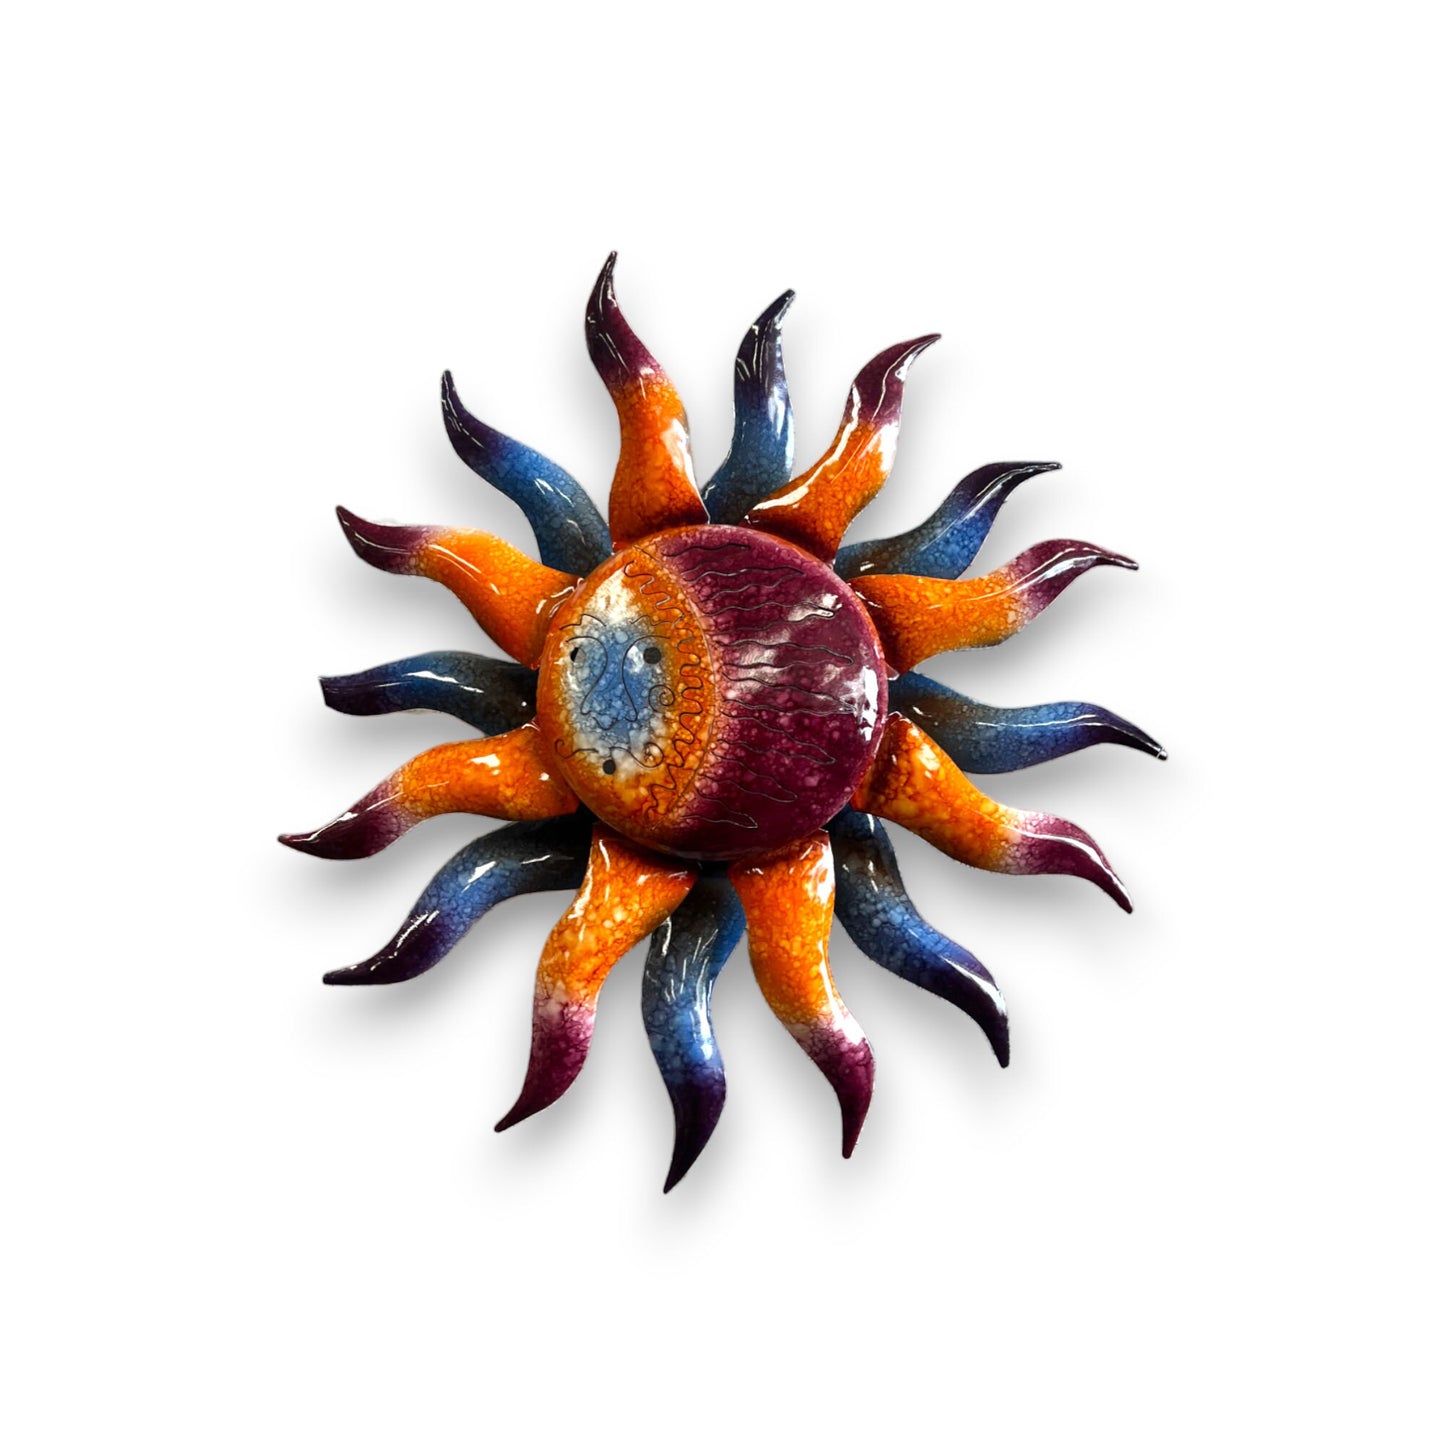 Vibrant Metal Sun Wall Decor | Handcrafted Mexican Artwork